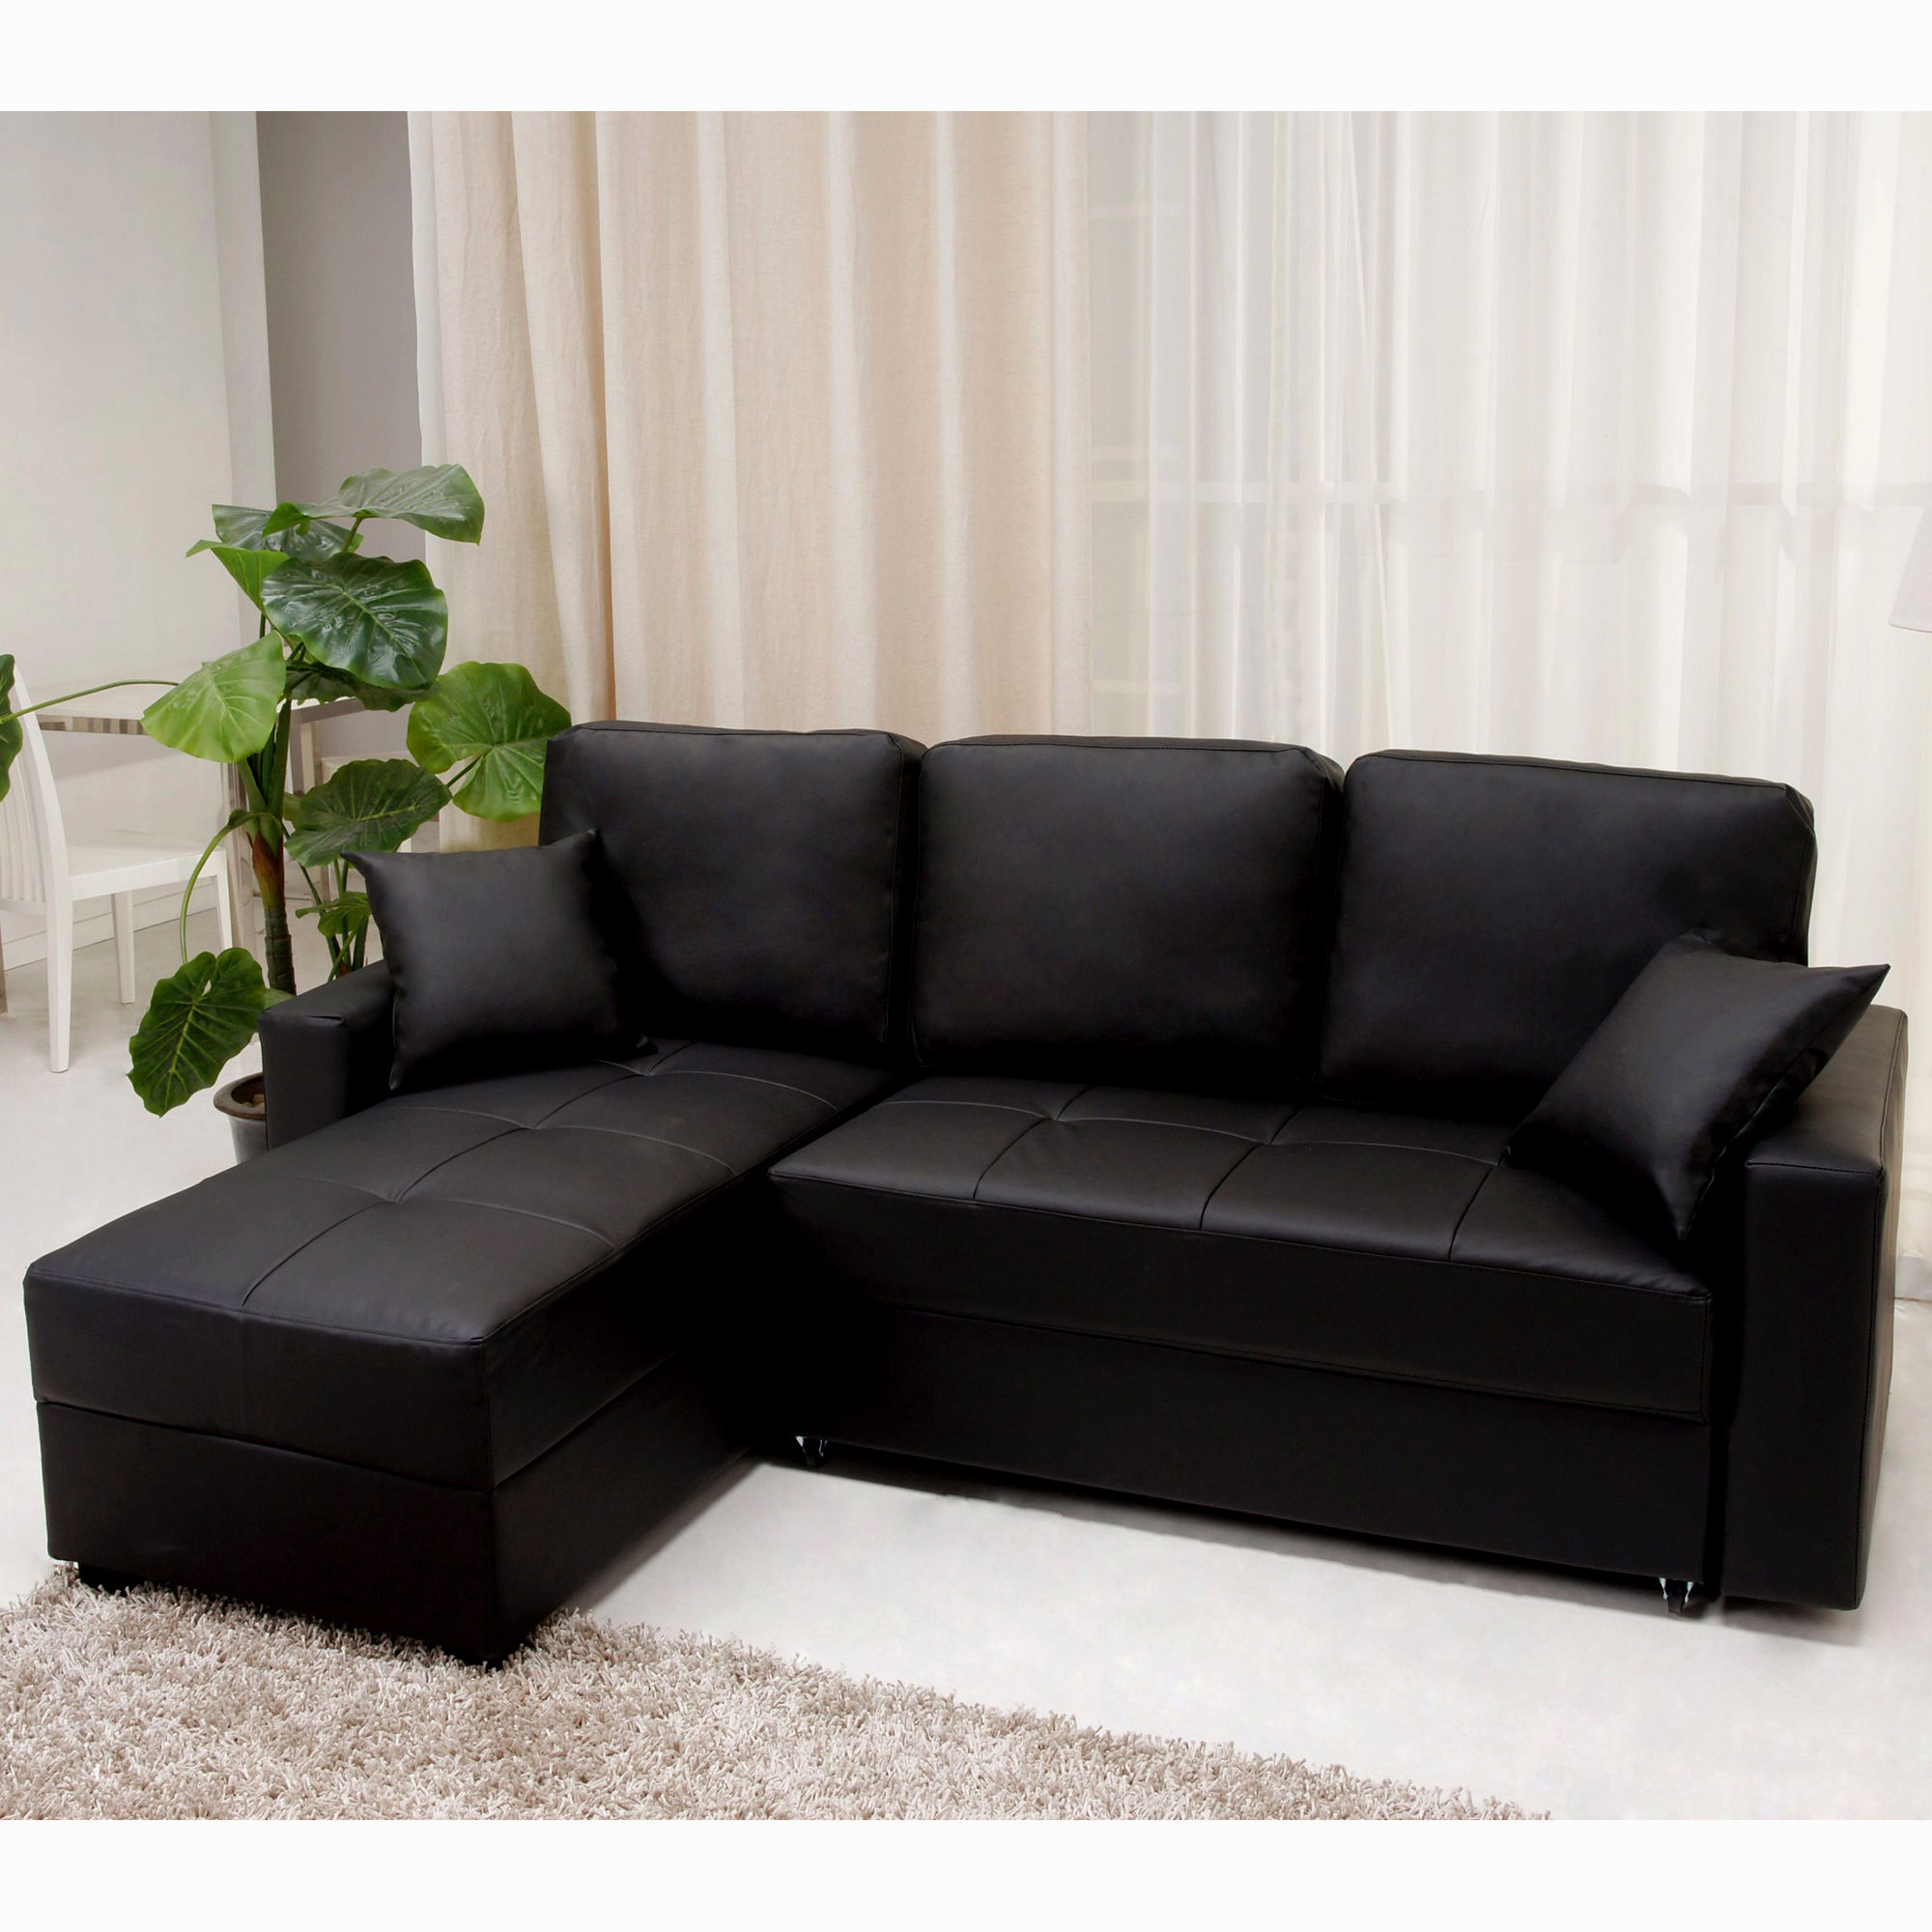 Apartment size sectional sleeper